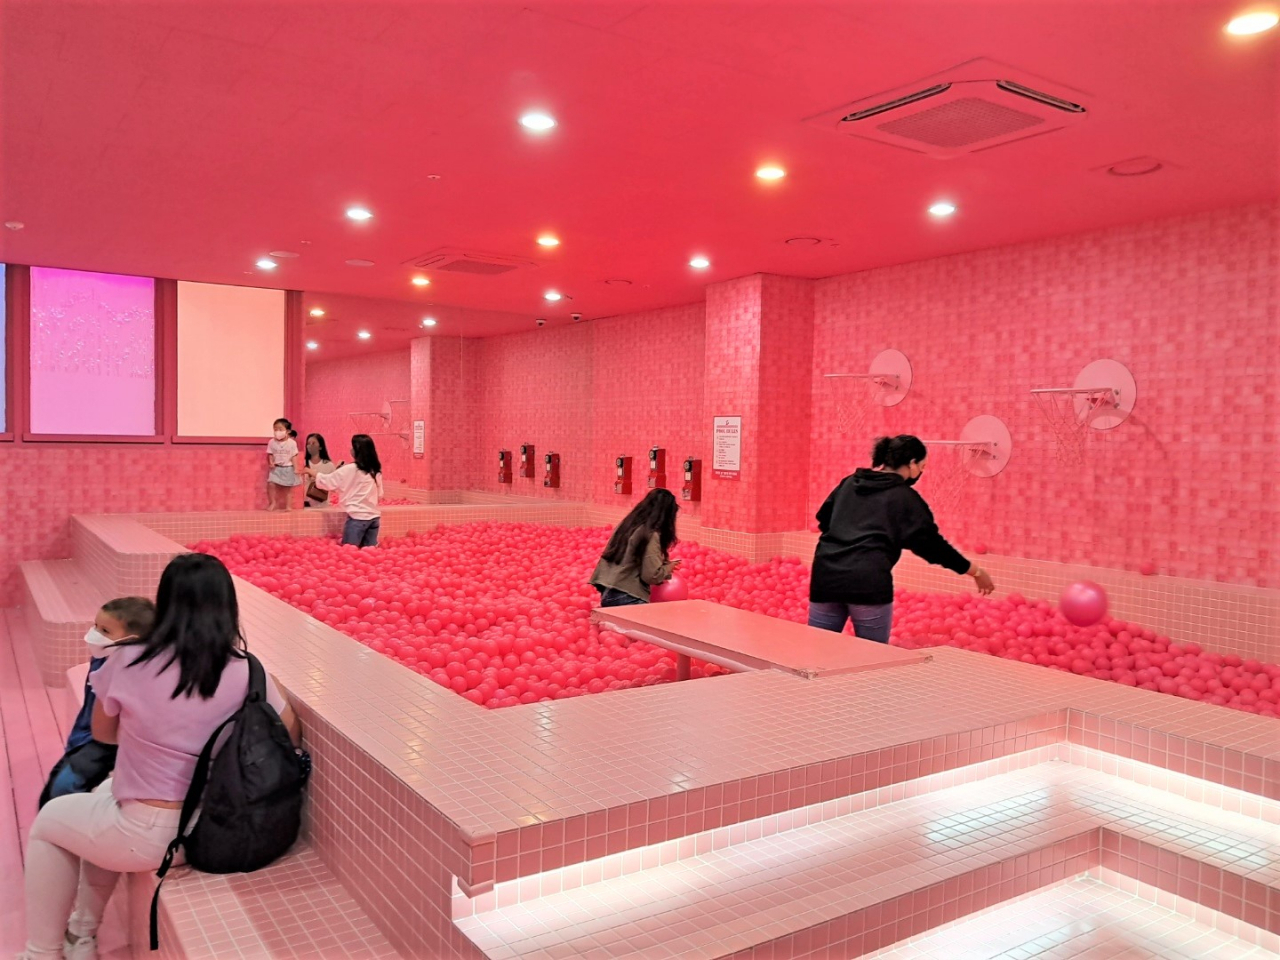 Visitors play in the ball pool named Pink Spa at Color Pool Museum. (Lee Si-jin/The Korea Herald)